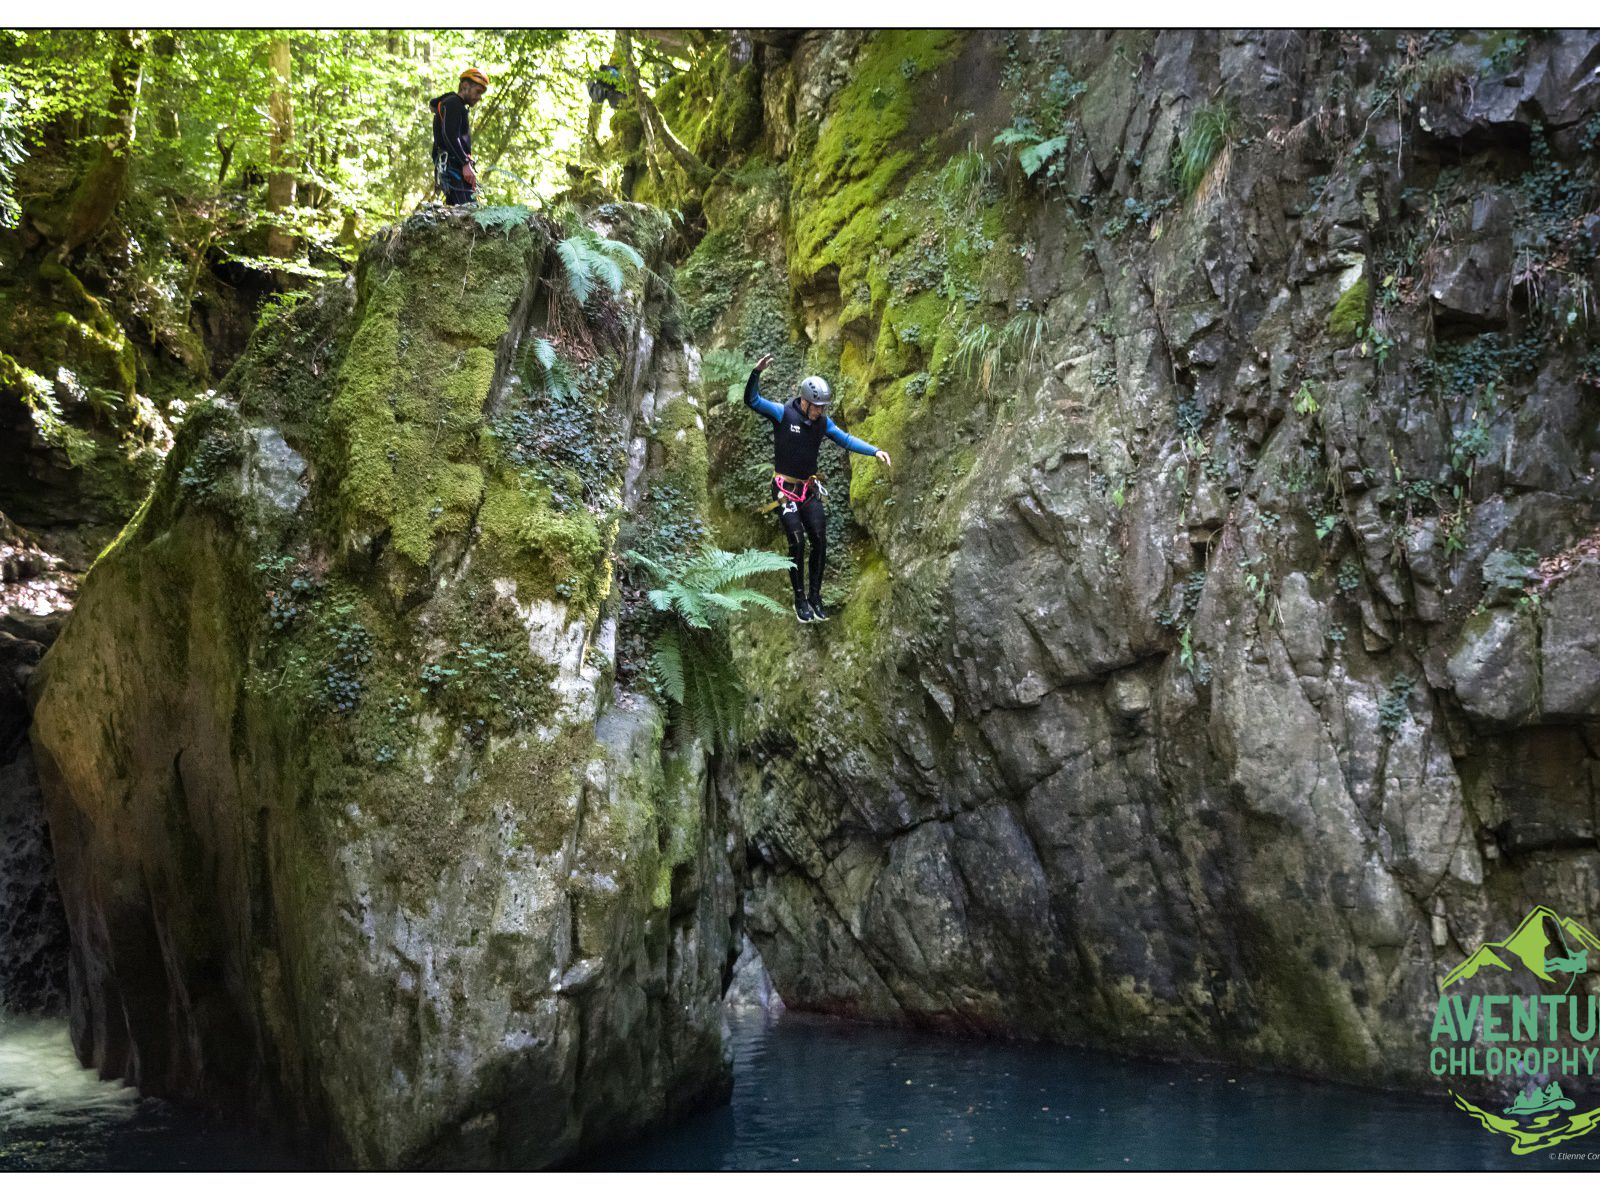 jump in the canyon of Bious - Pyrénées Atlantiques Béarn